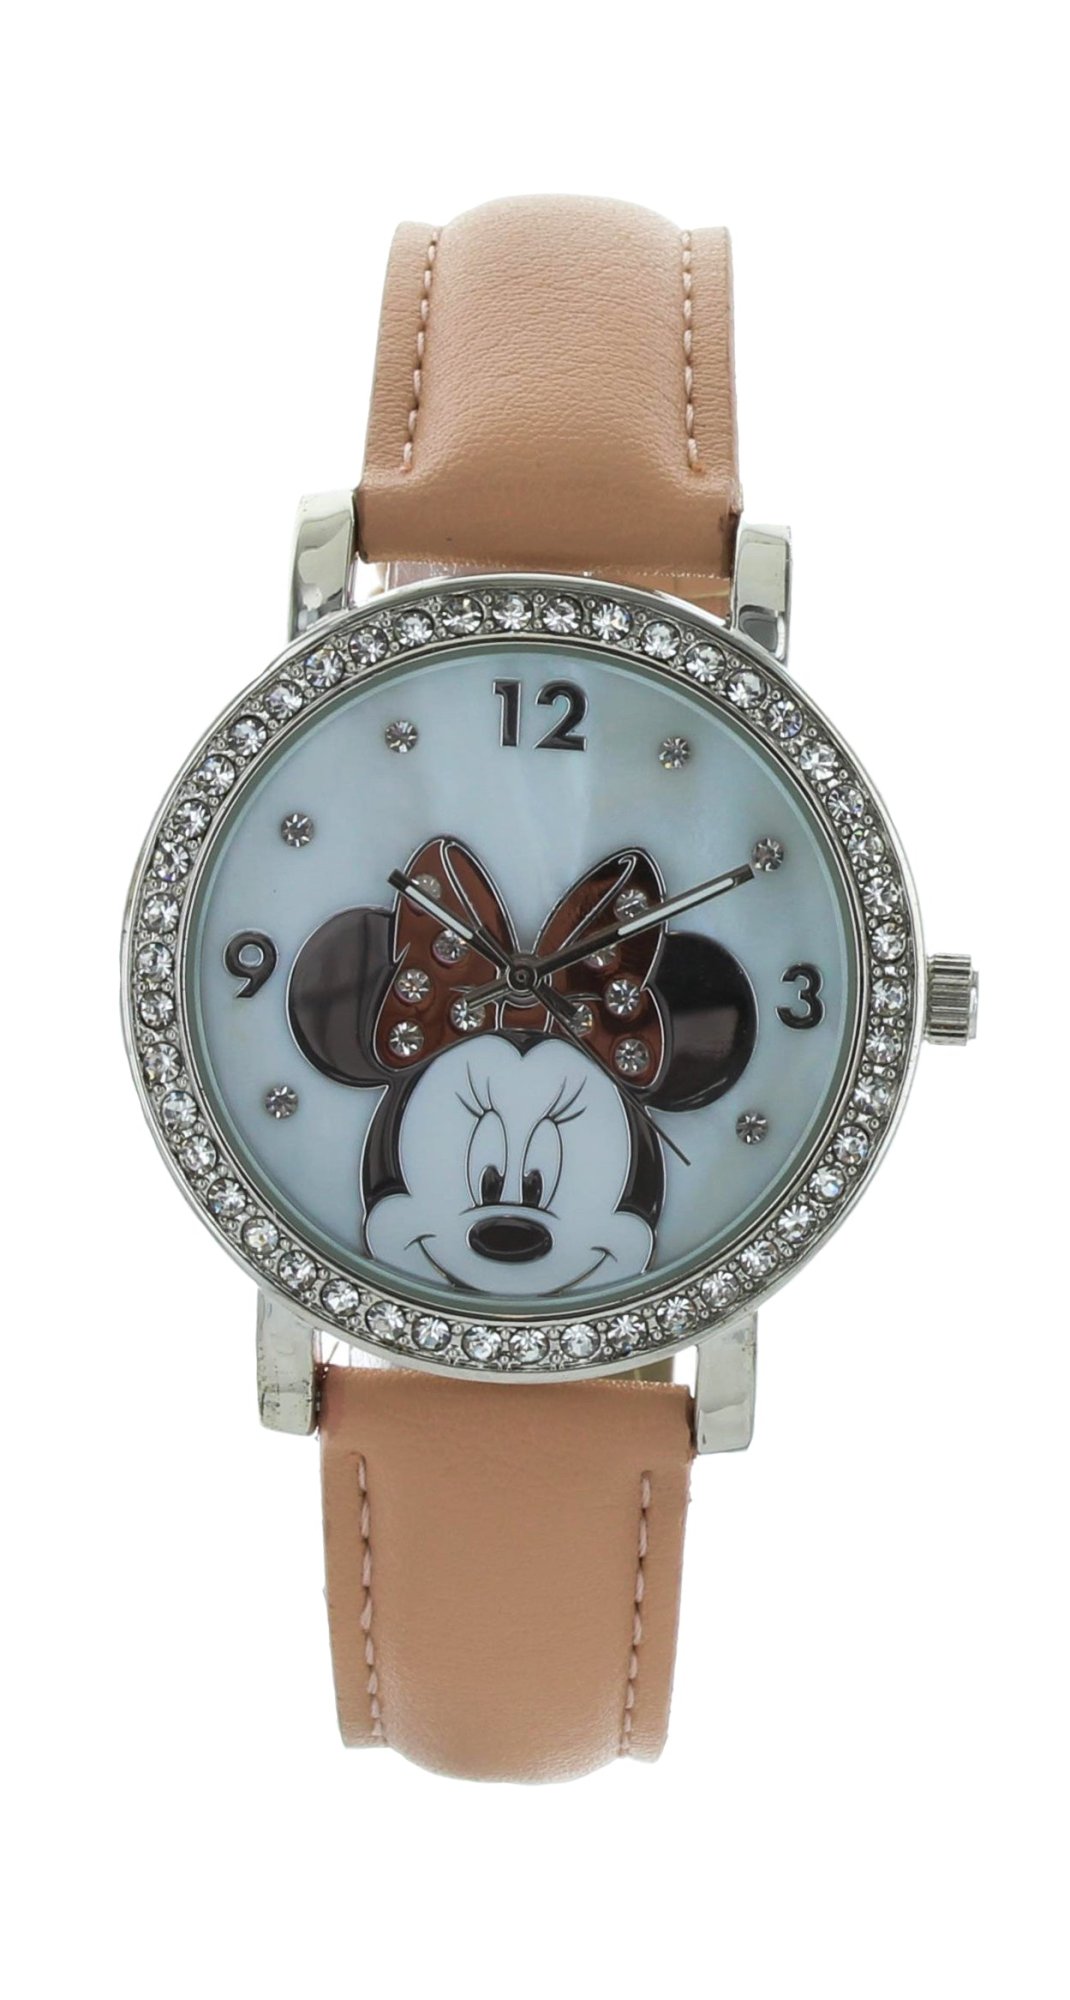 Model: Women's Disney Minnie Mouse Watch with Rhinestones and Pink Band